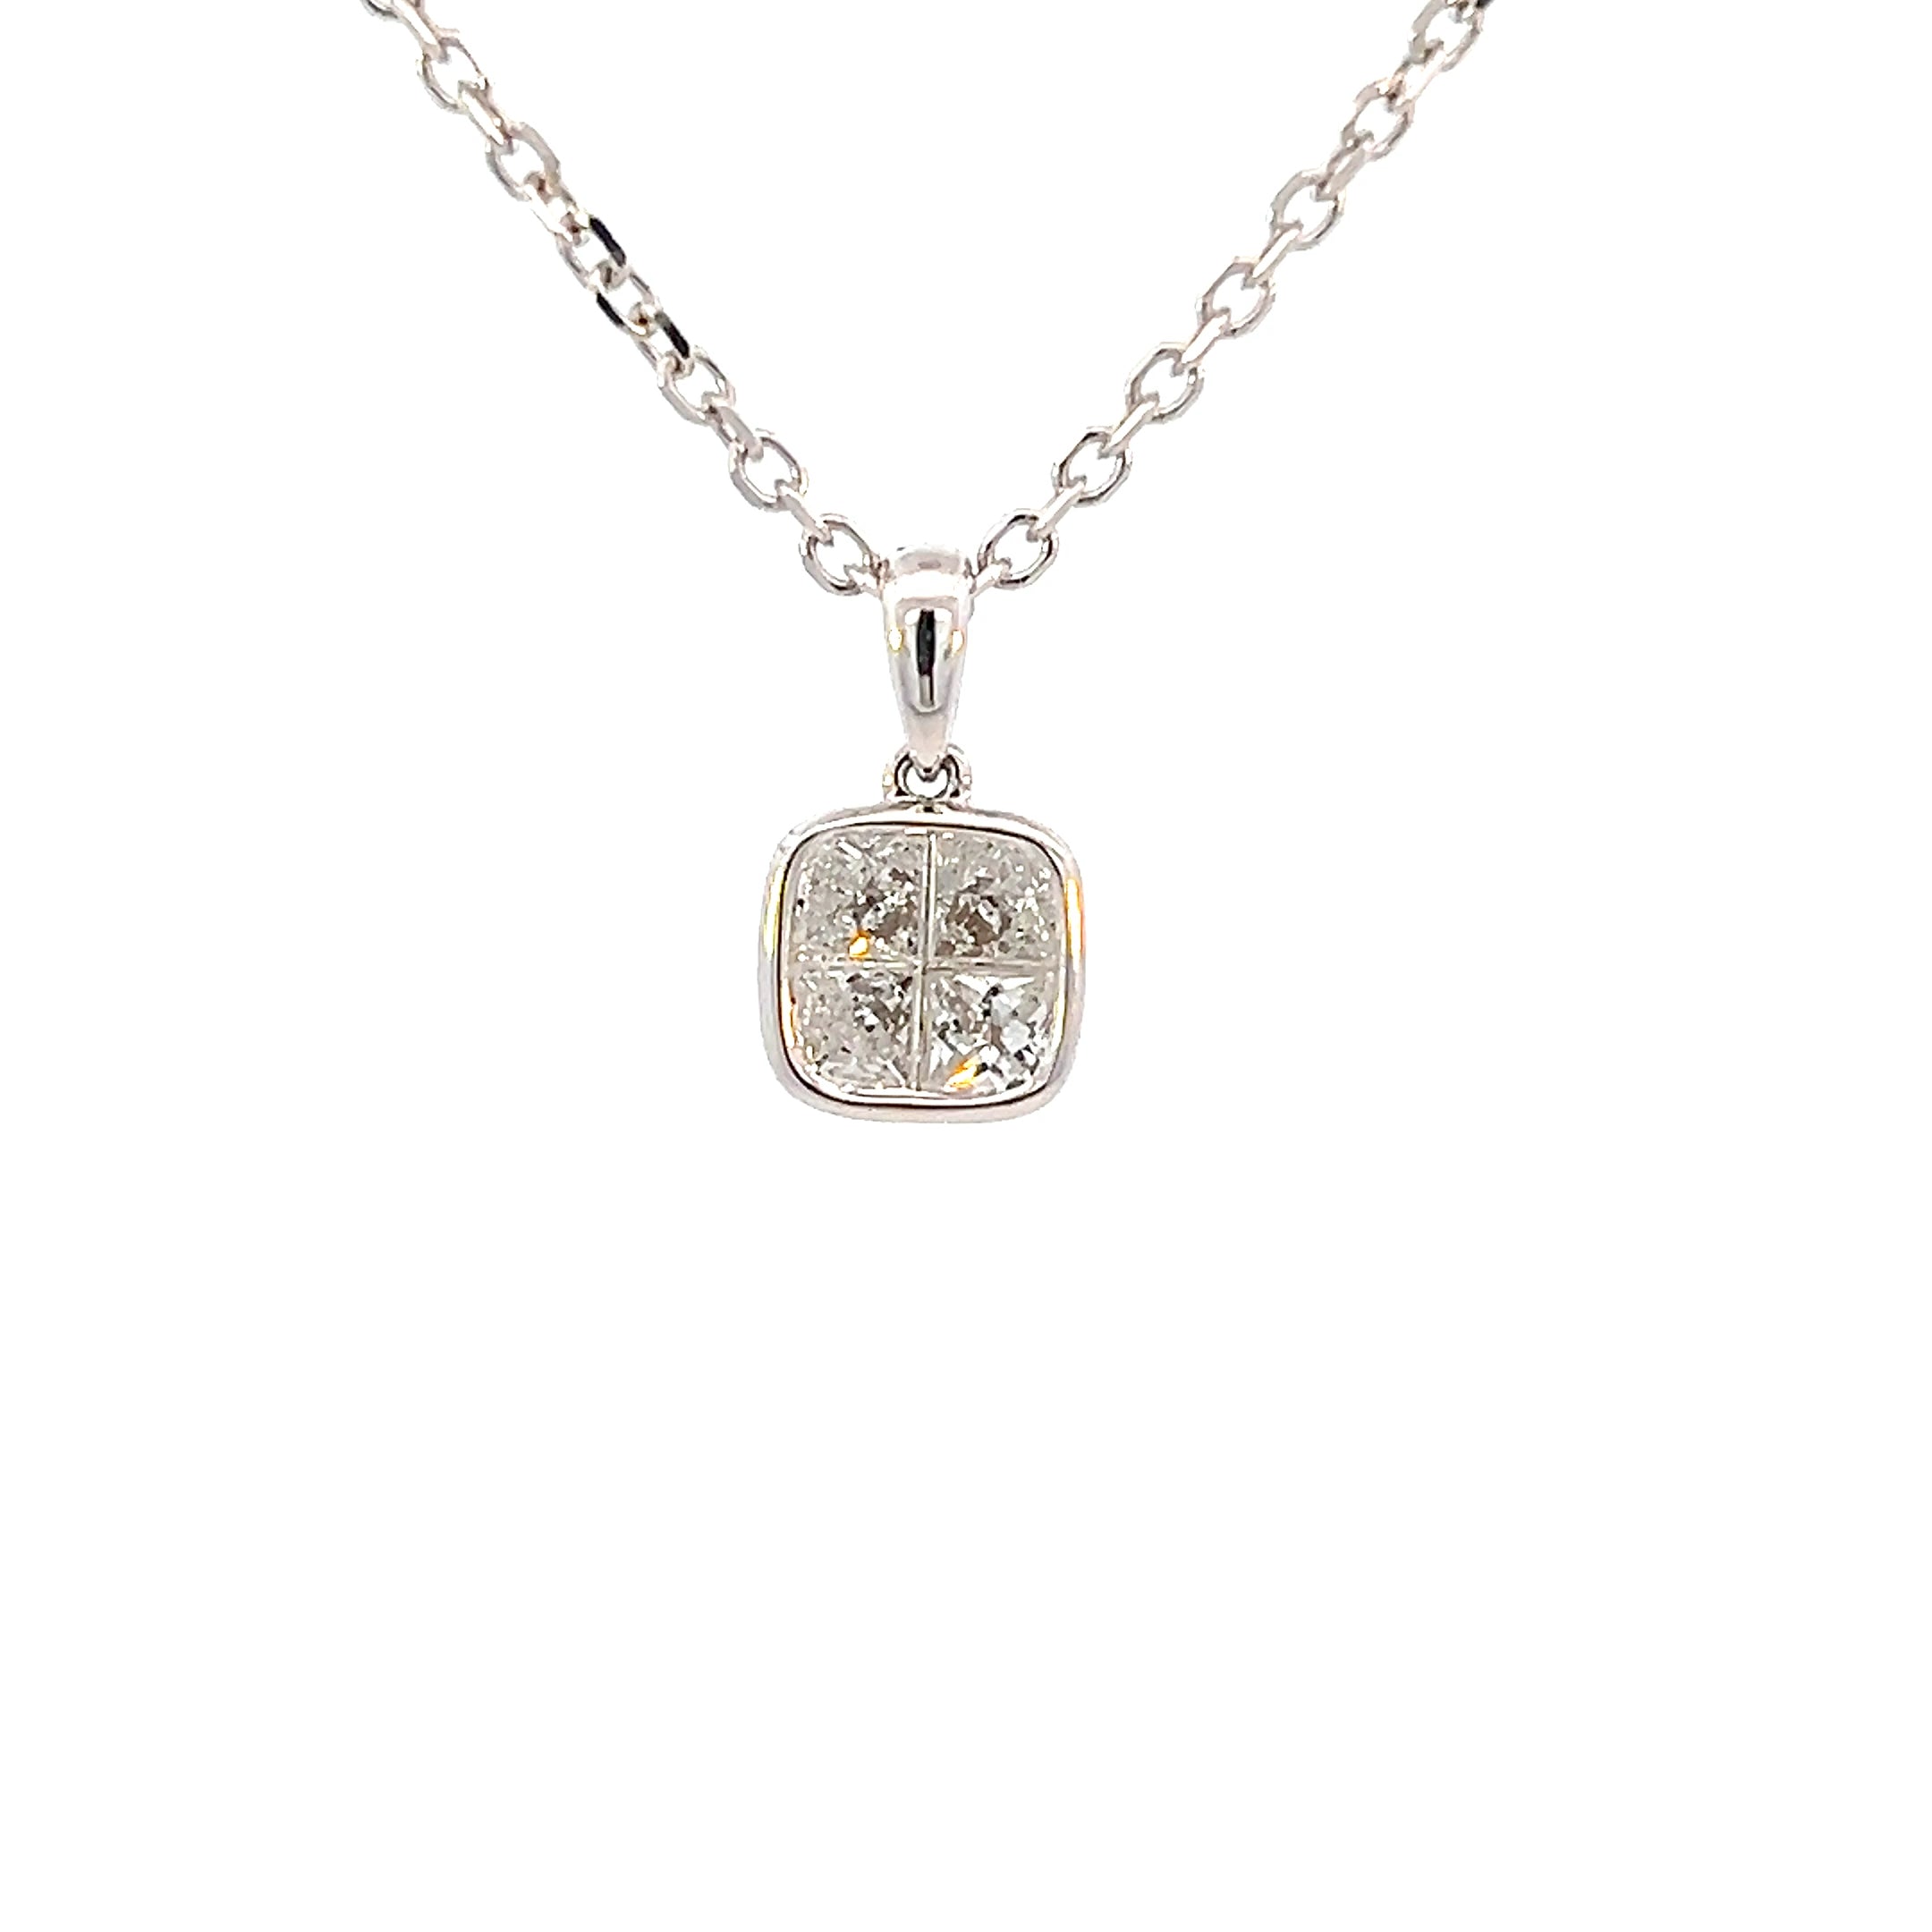 Stunning Square Diamond Pendant Necklace in 18K White Gold